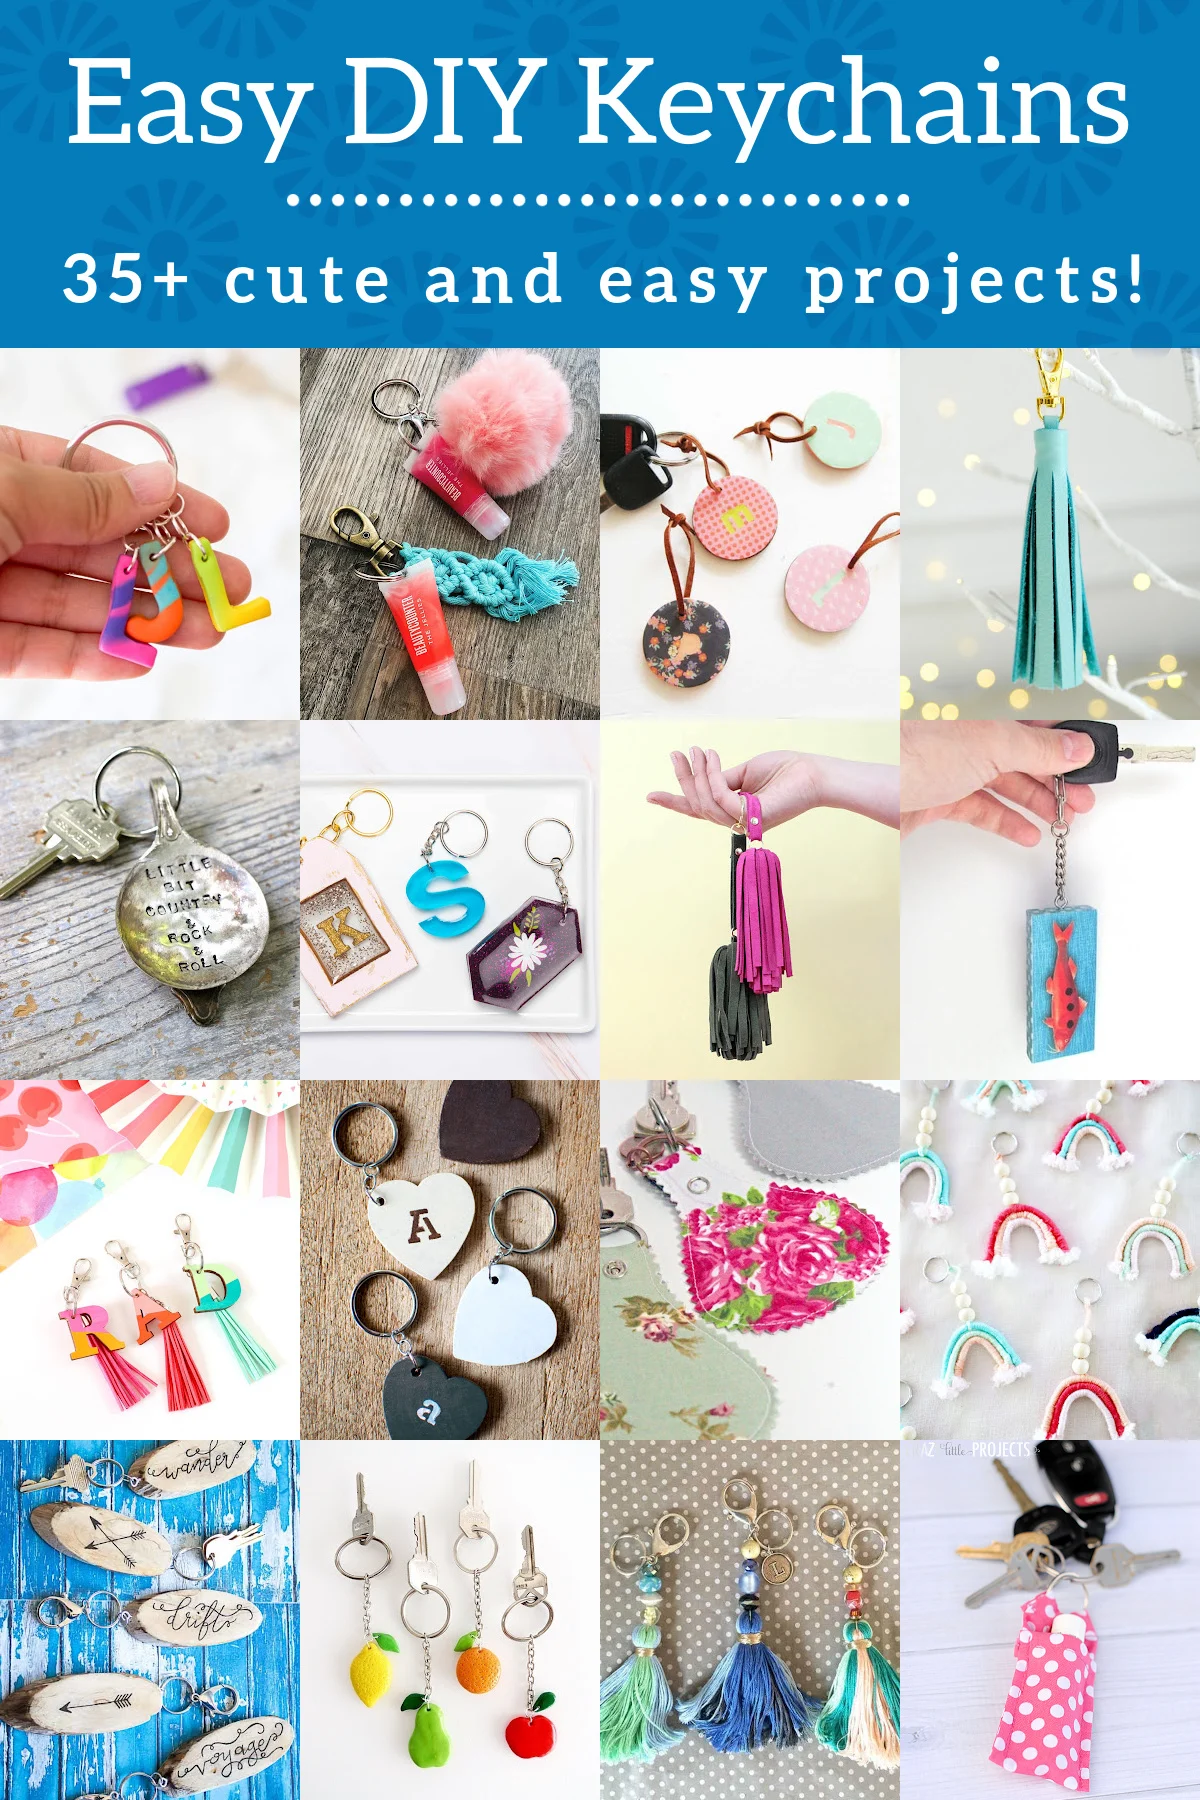 Letter Keychain With Sprinkles and Tassels -   Resin jewelry diy,  Resin crafts, Diy resin crafts